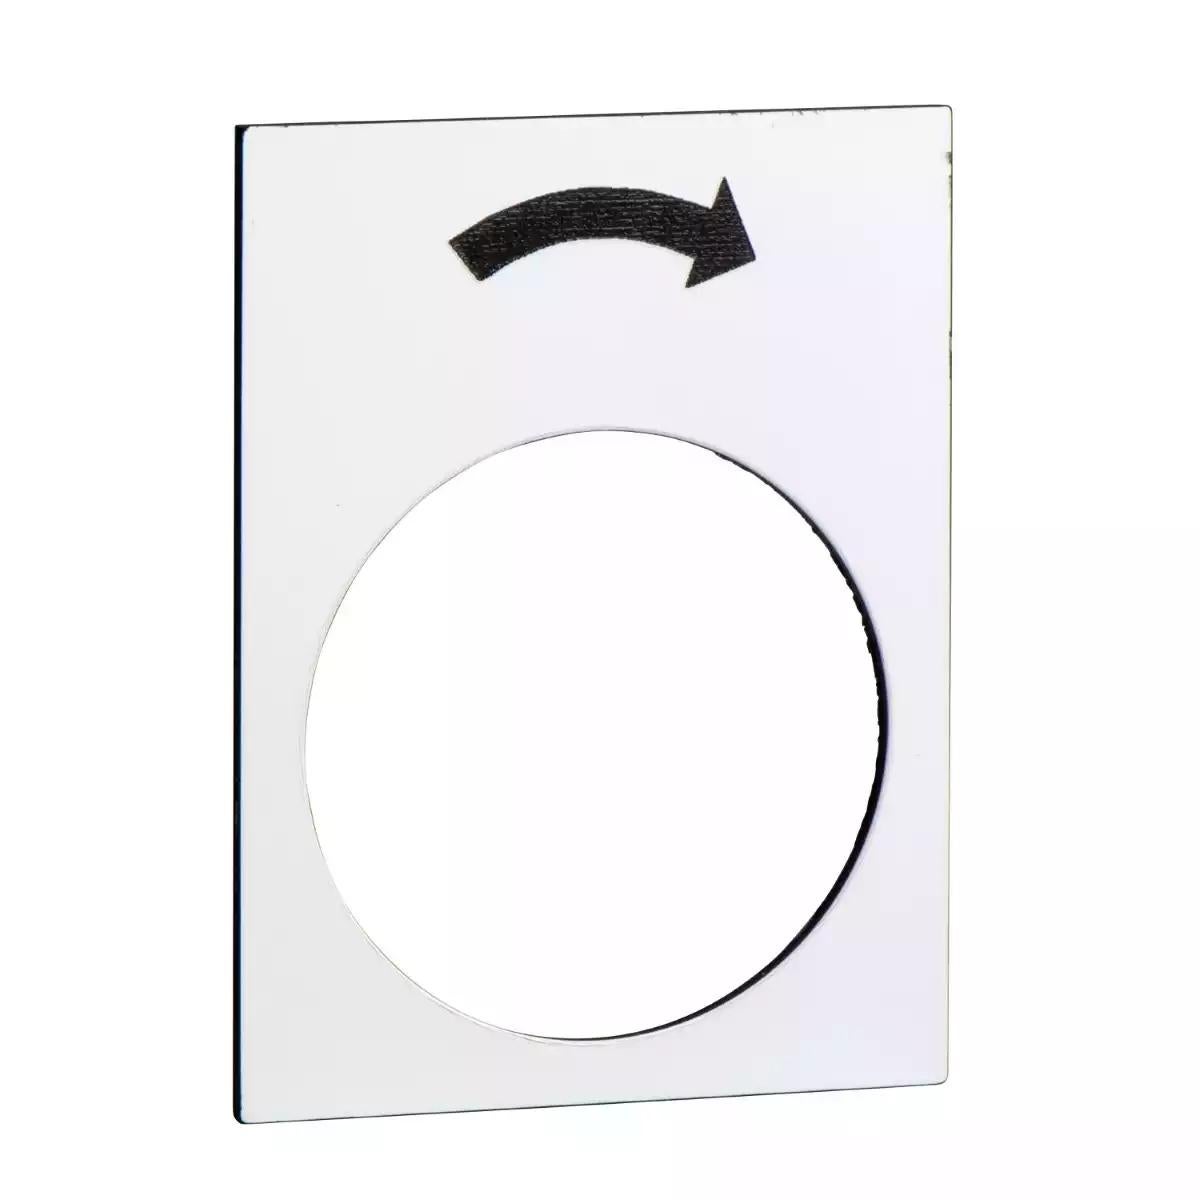 Harmony XAC, Marked Legend, Nameplate, 30 x 40mm, Plastic, White, 22mm Push Button, Black Marked Rounded Arrow